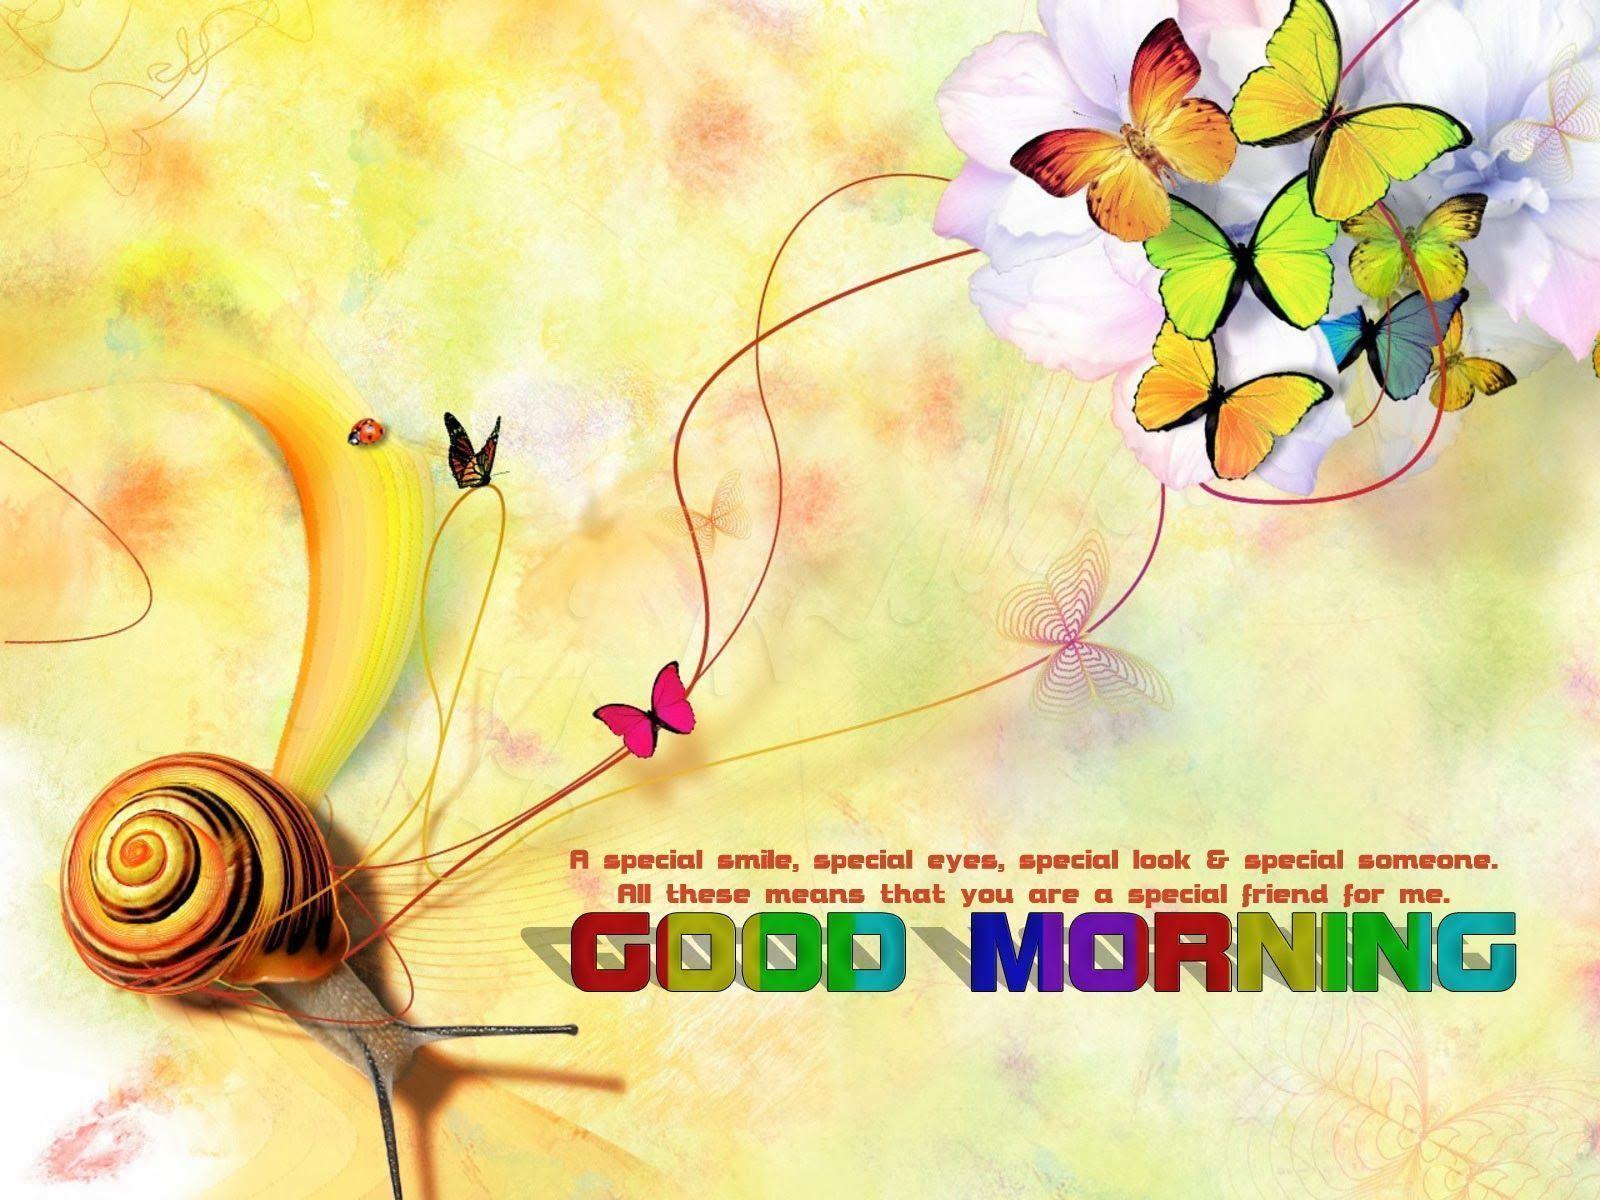 Sms with Wallpaper: Good morning new image 2014